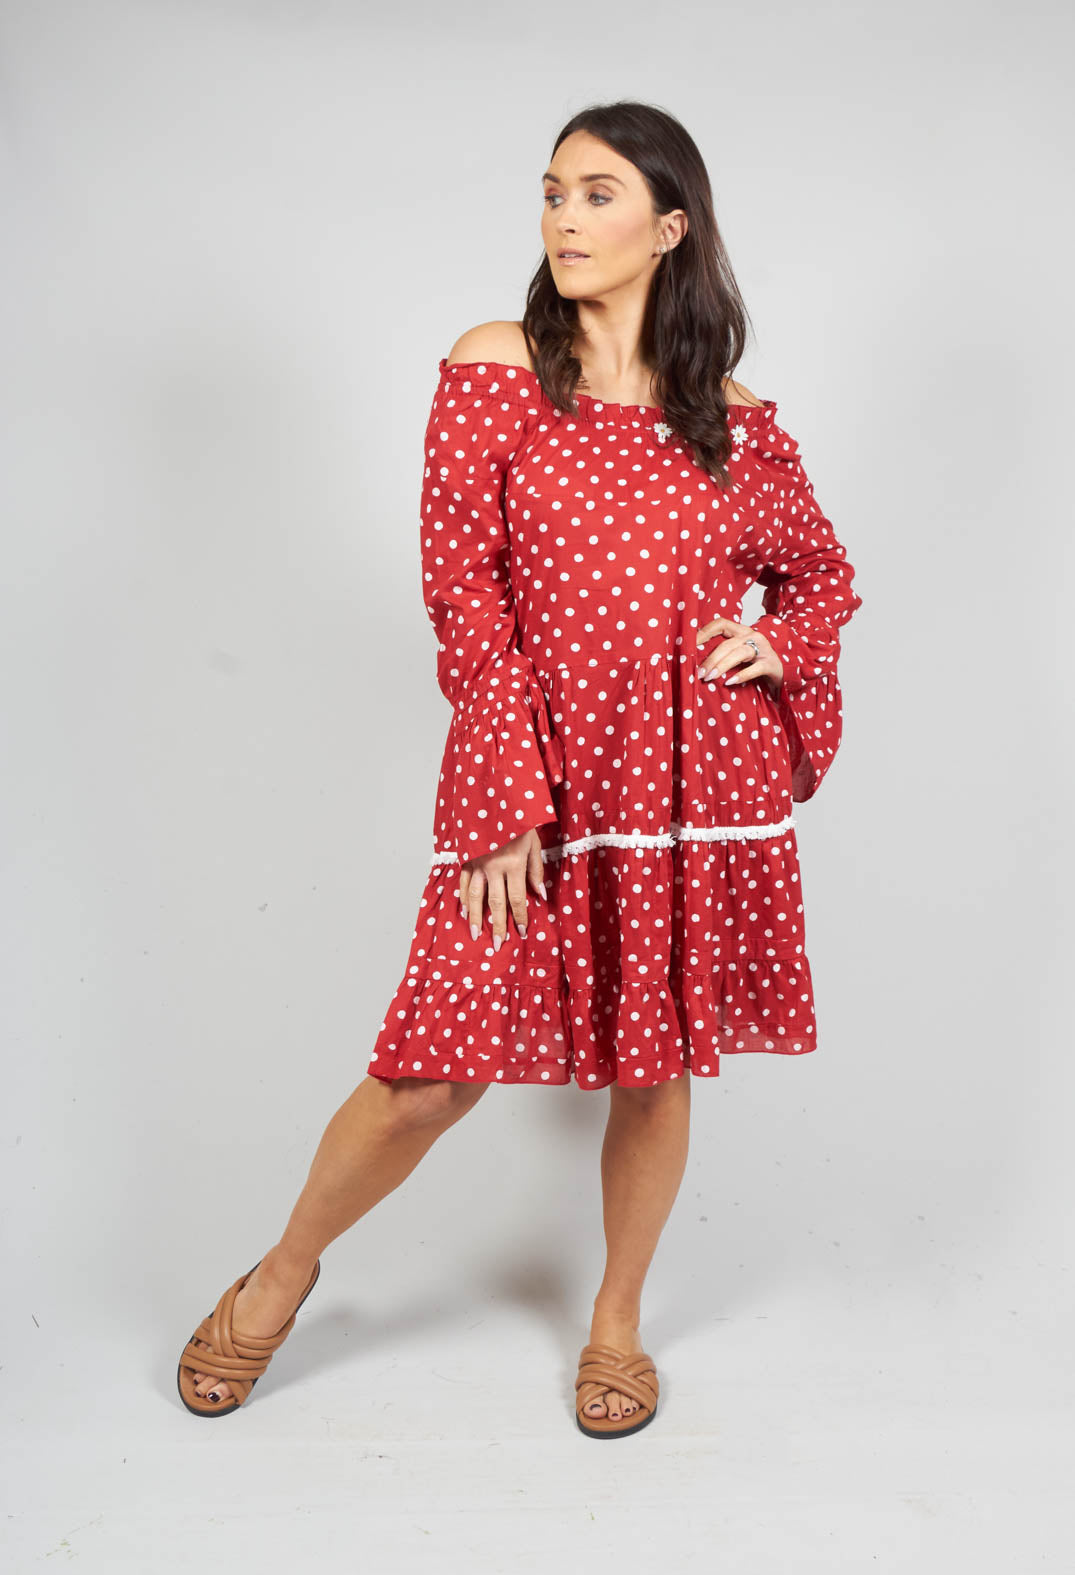 Long Sleeve Tunic in Audrey Red and White Polkadot